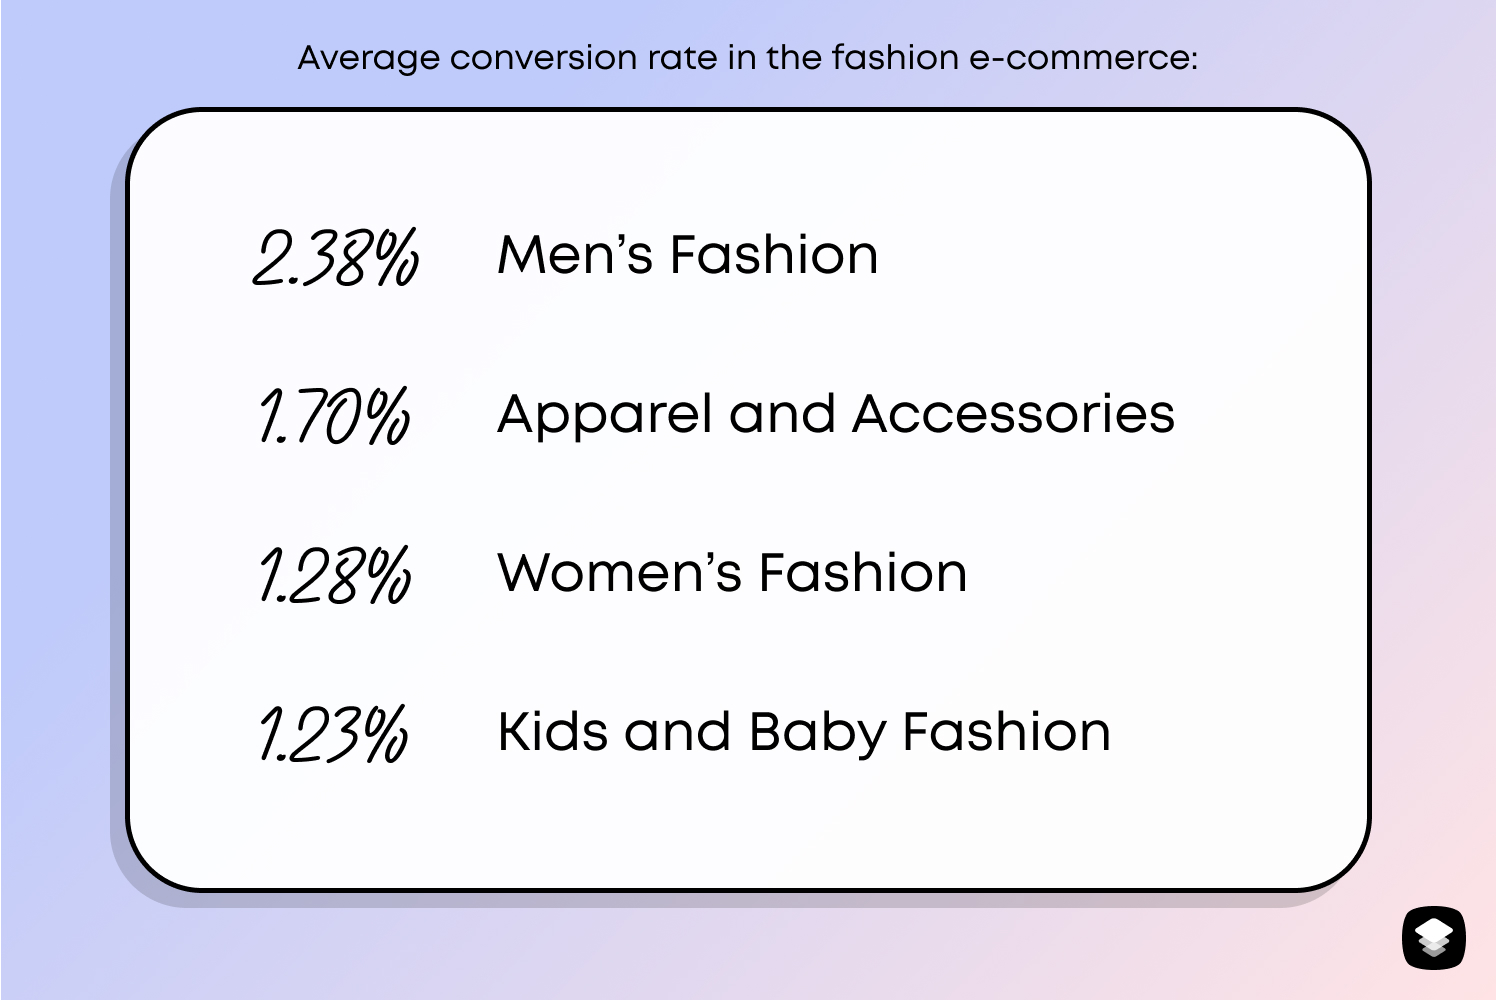 average conversion rate in the fashion e-commerce industry